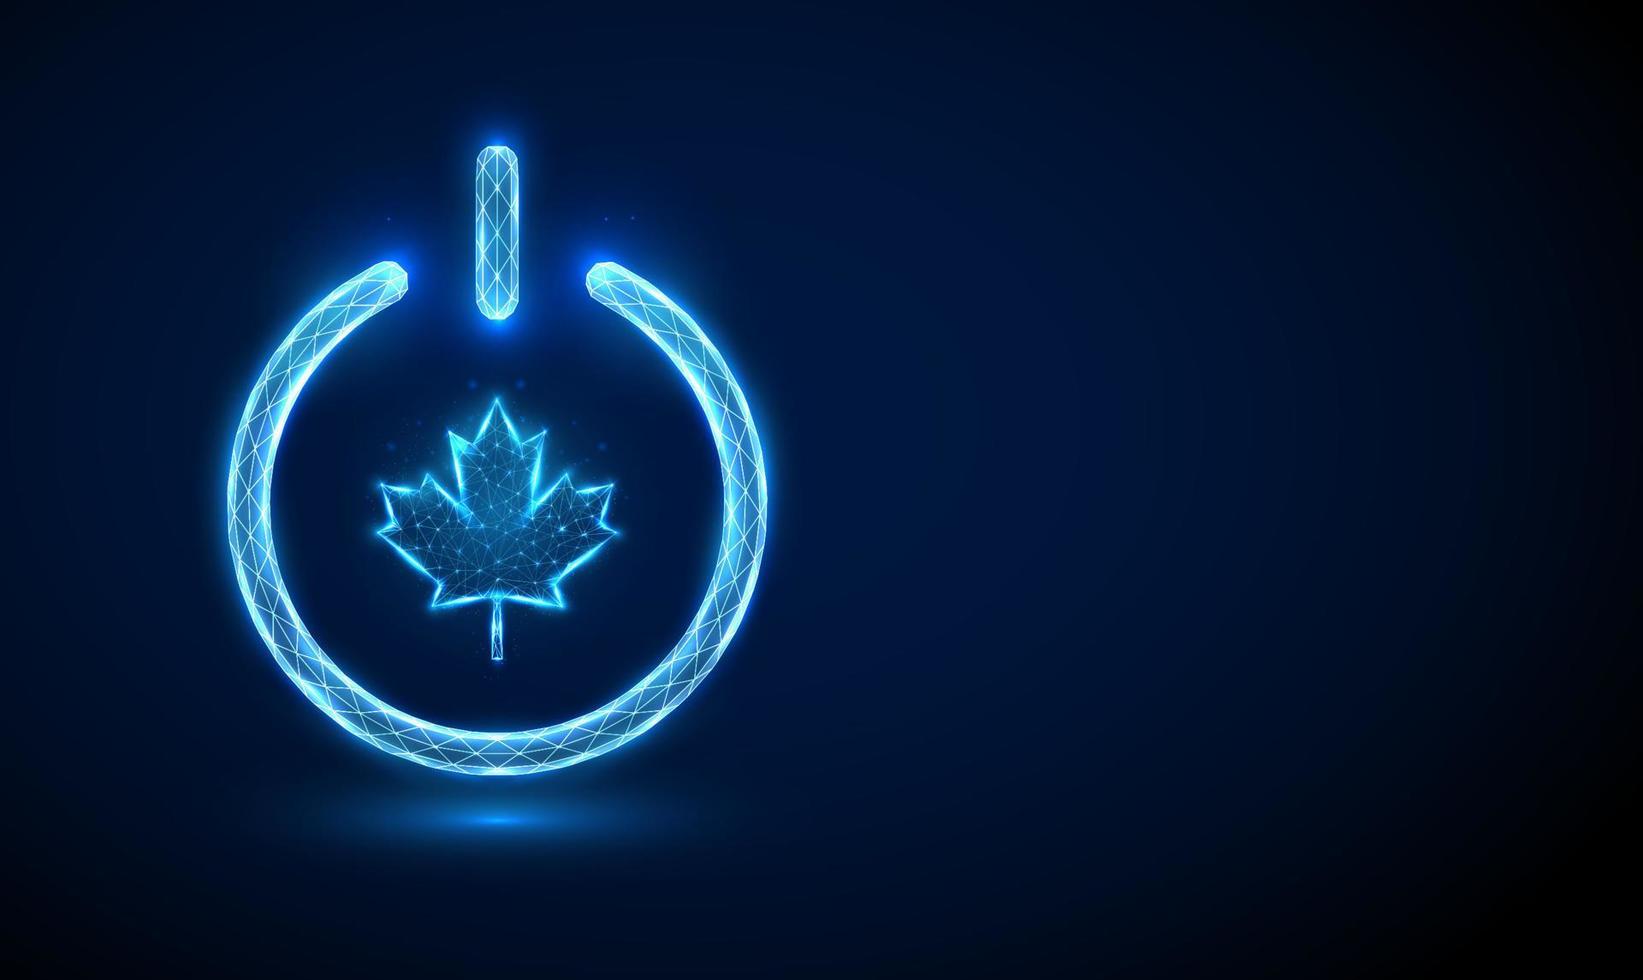 Abstract blue maple leaf shape in power button vector